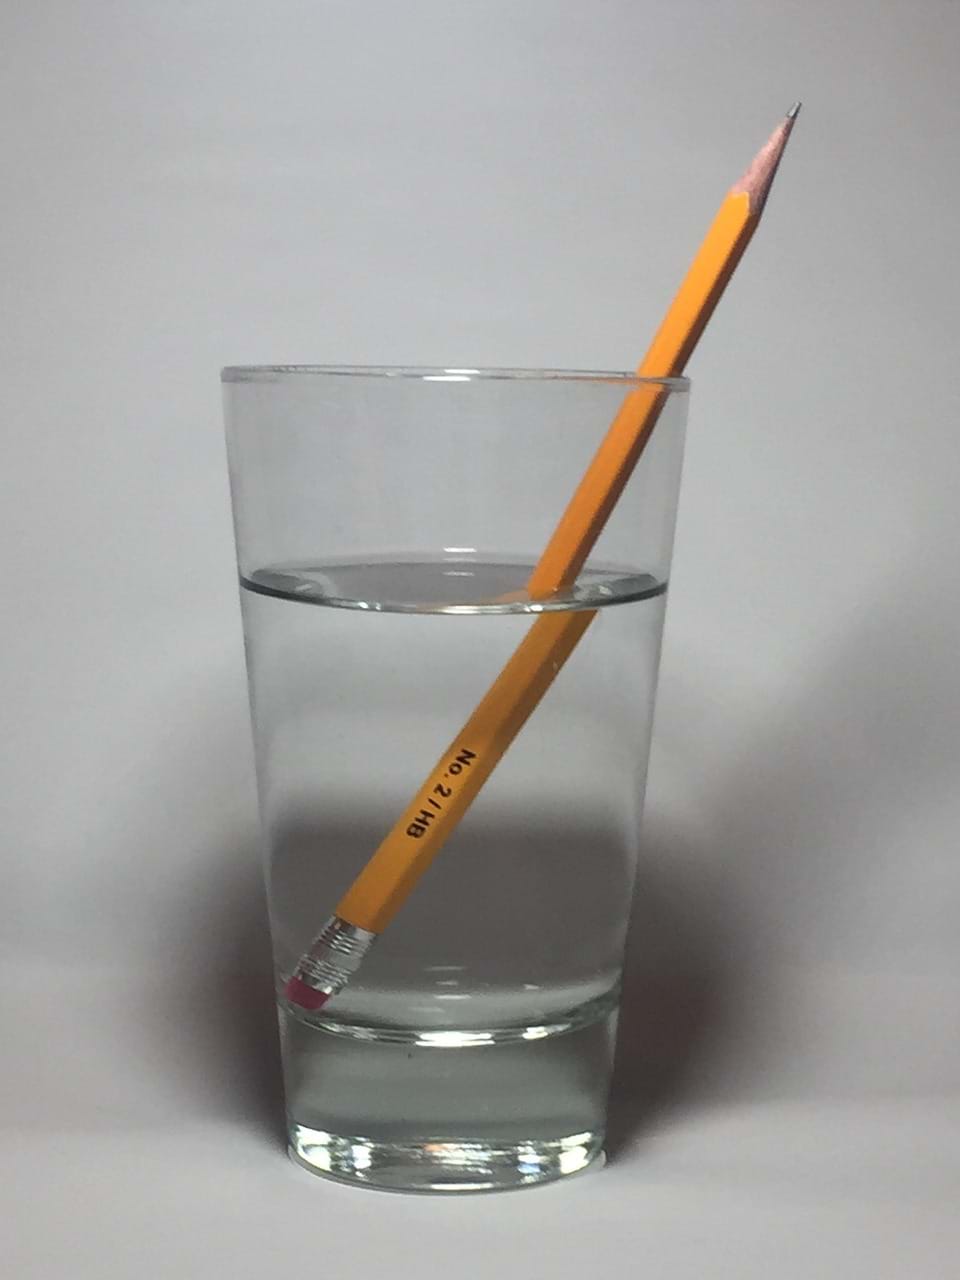 Pencil in water showing refraction